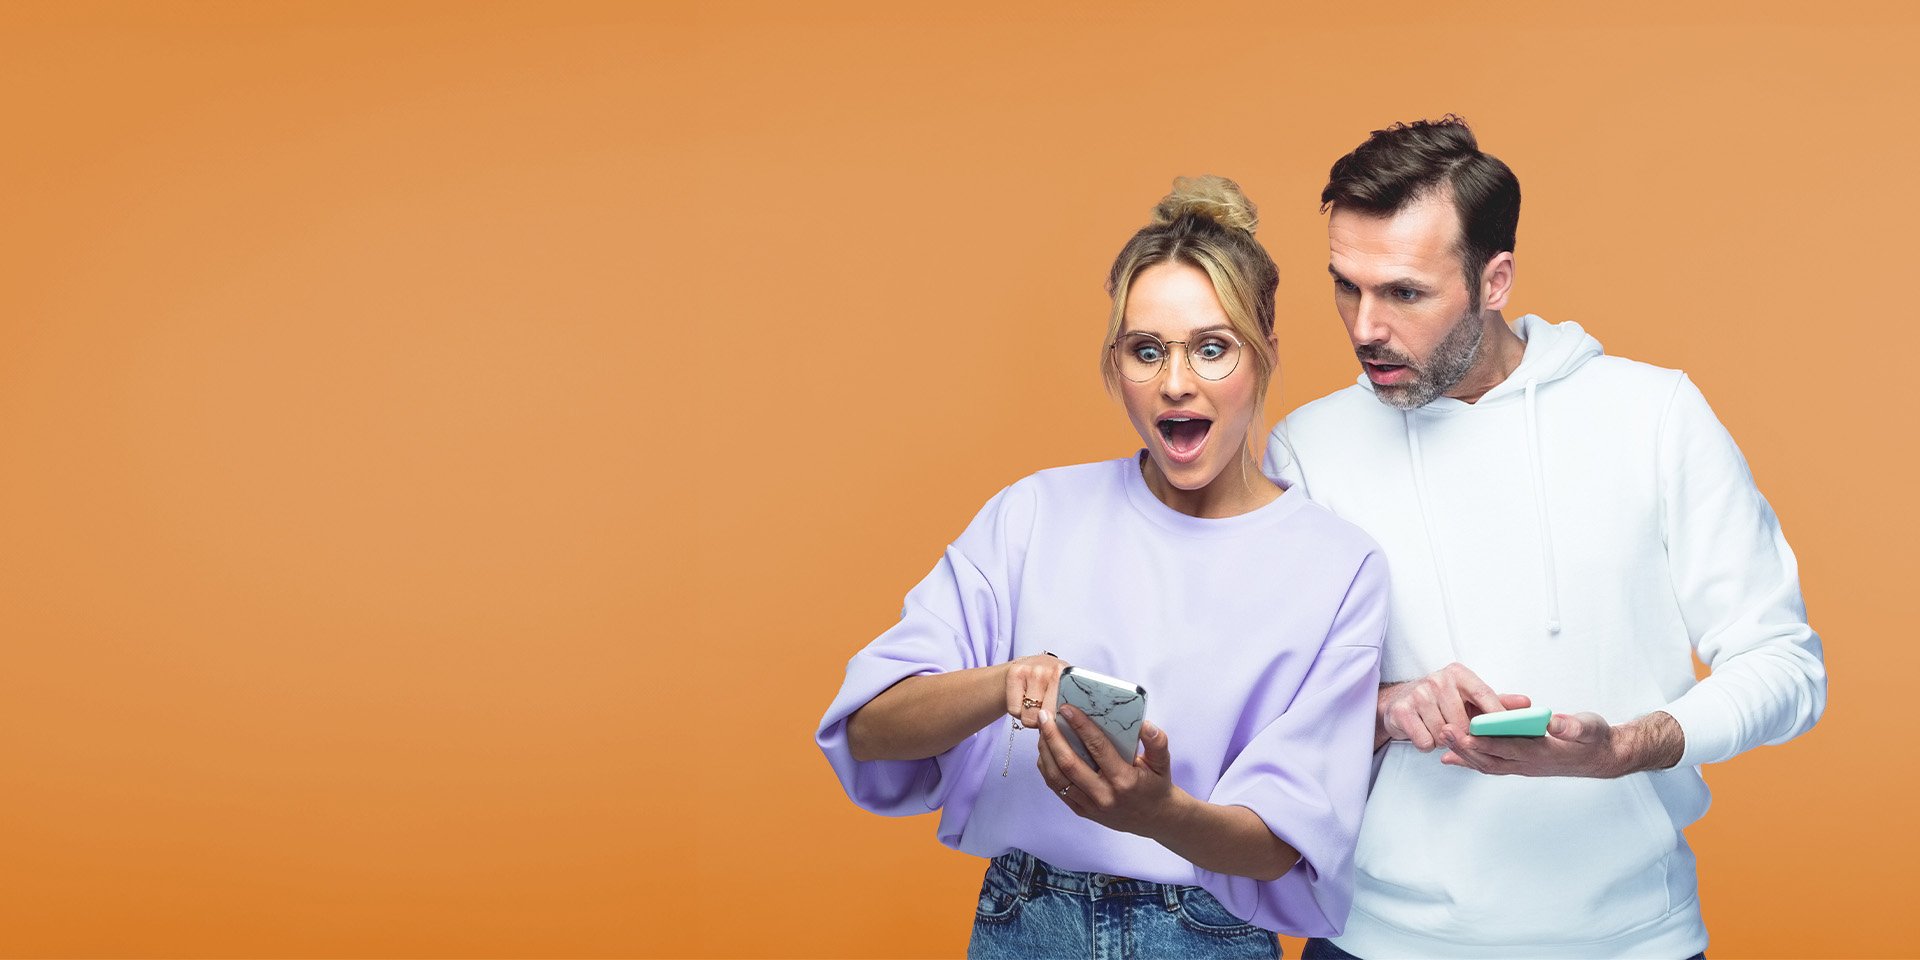 Couple with mobile phones in hand, the woman, with her hair in a bun and wearing glasses, reacts to a surprising screen. The man looks over her phone against an orange background.